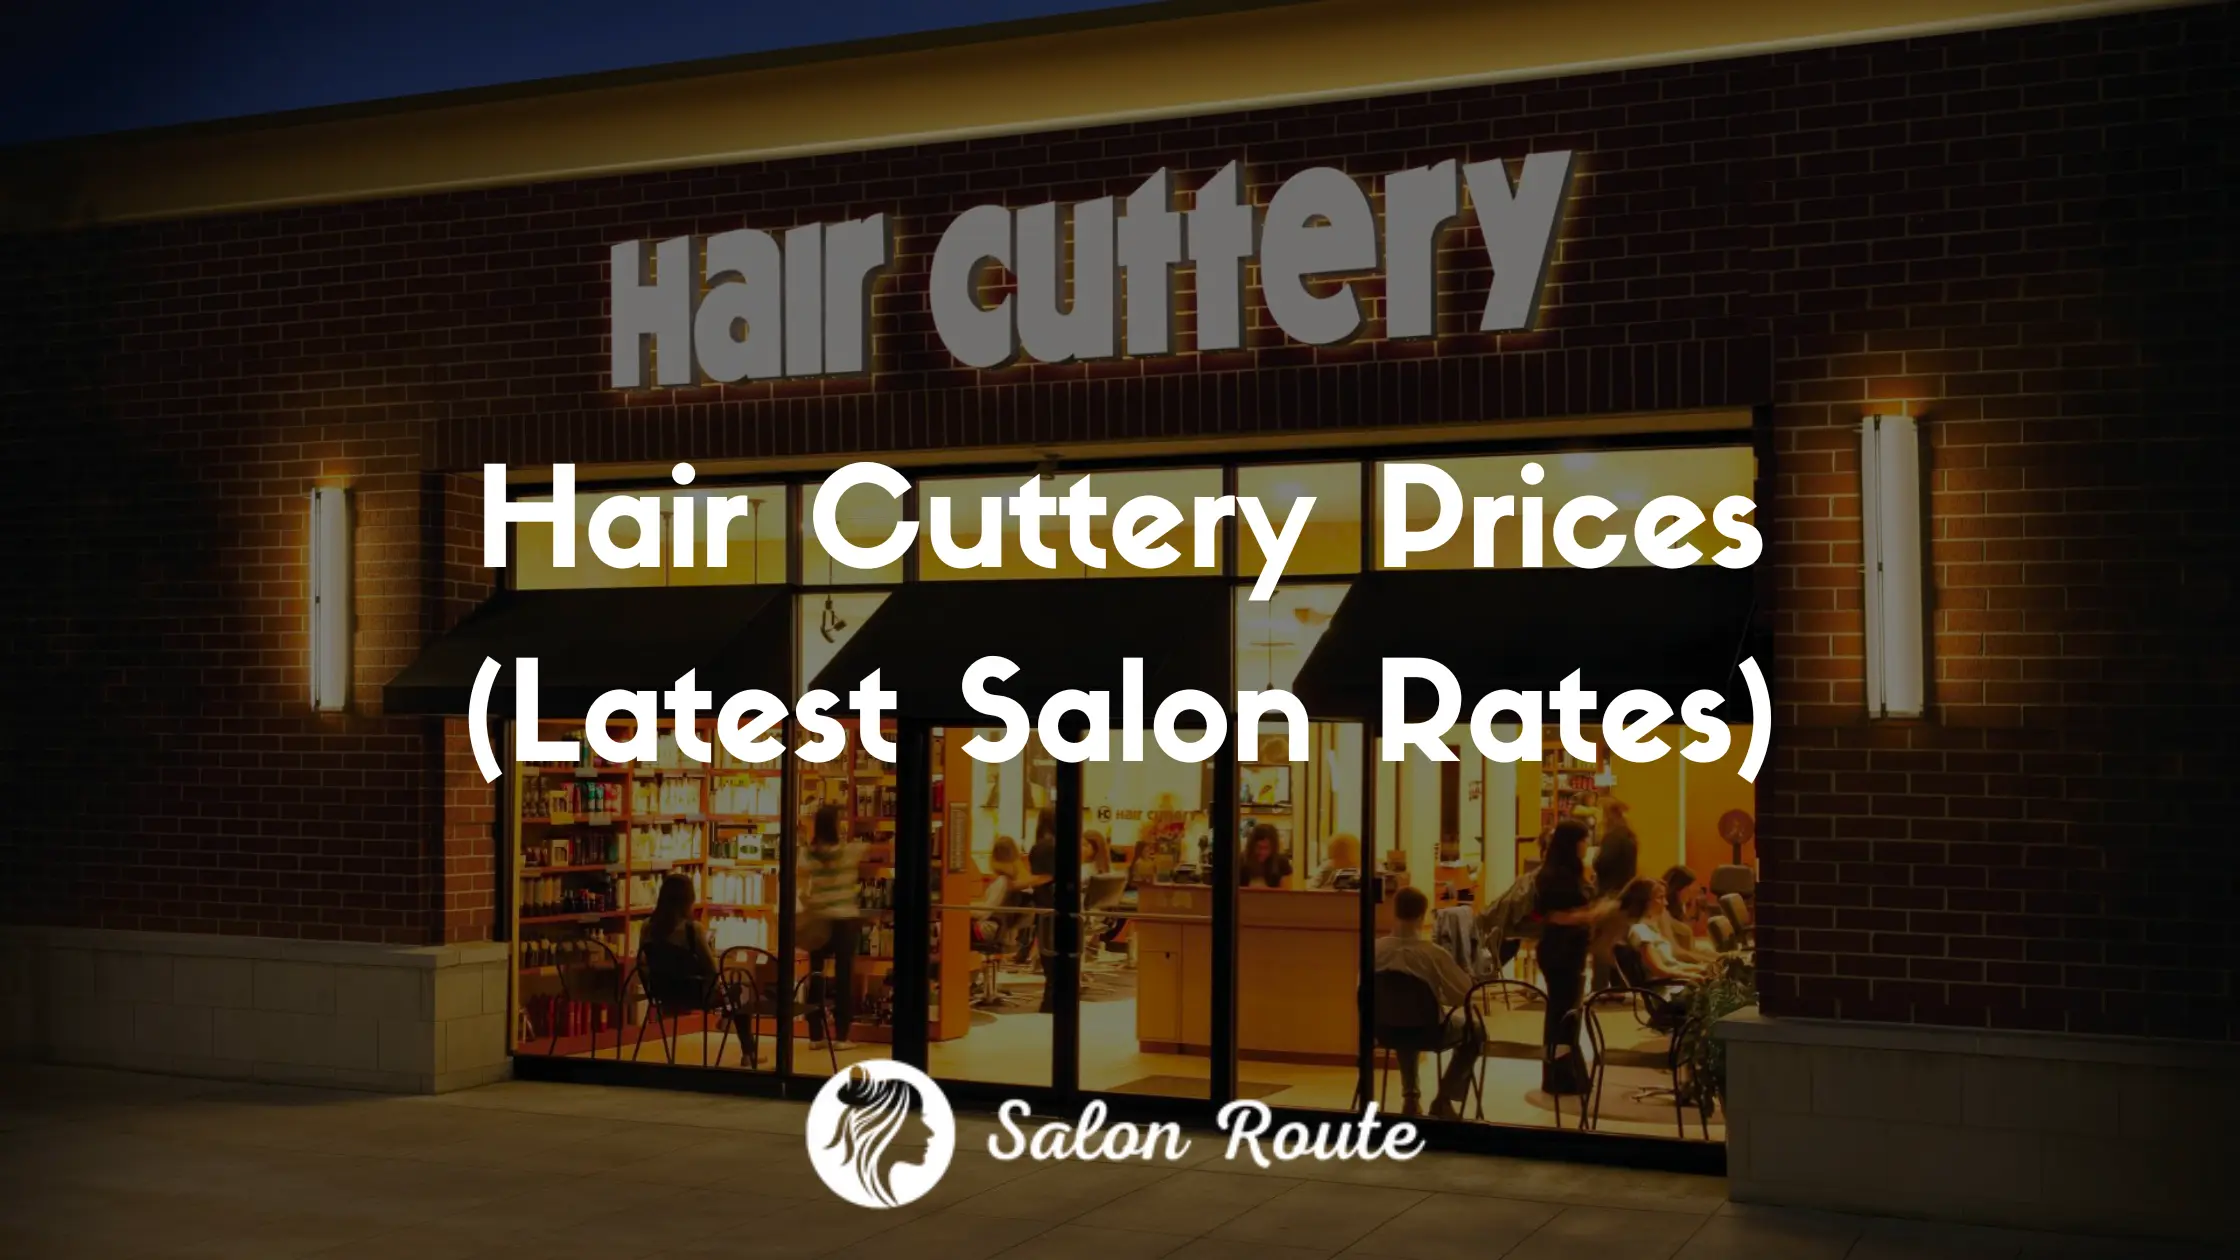 Hair Cuttery Prices (Latest Salon Rates)